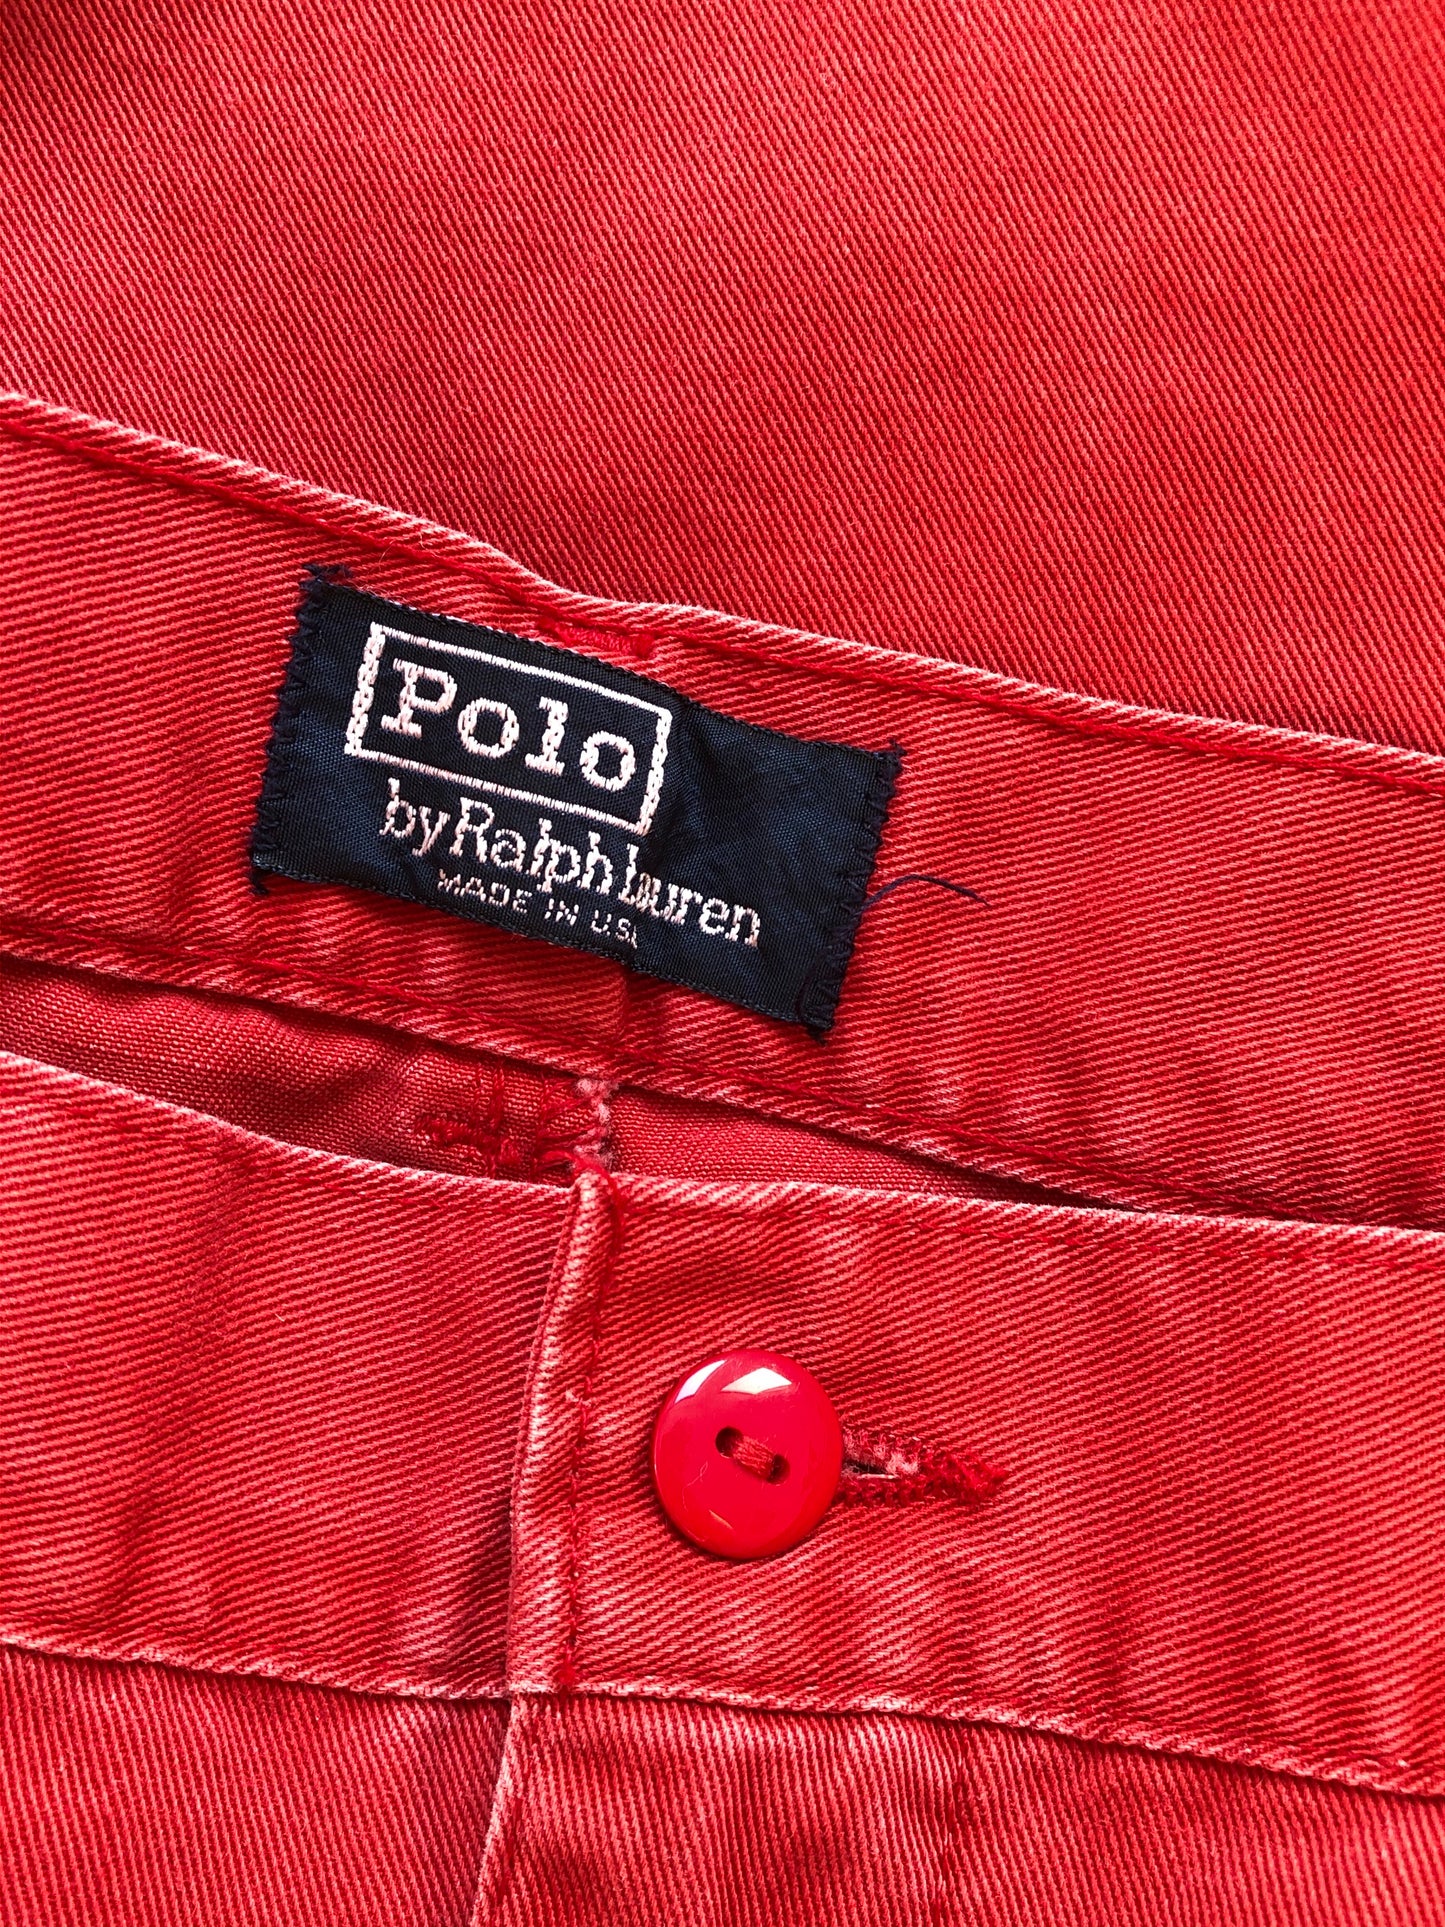 Polo by Ralph Lauren trousers